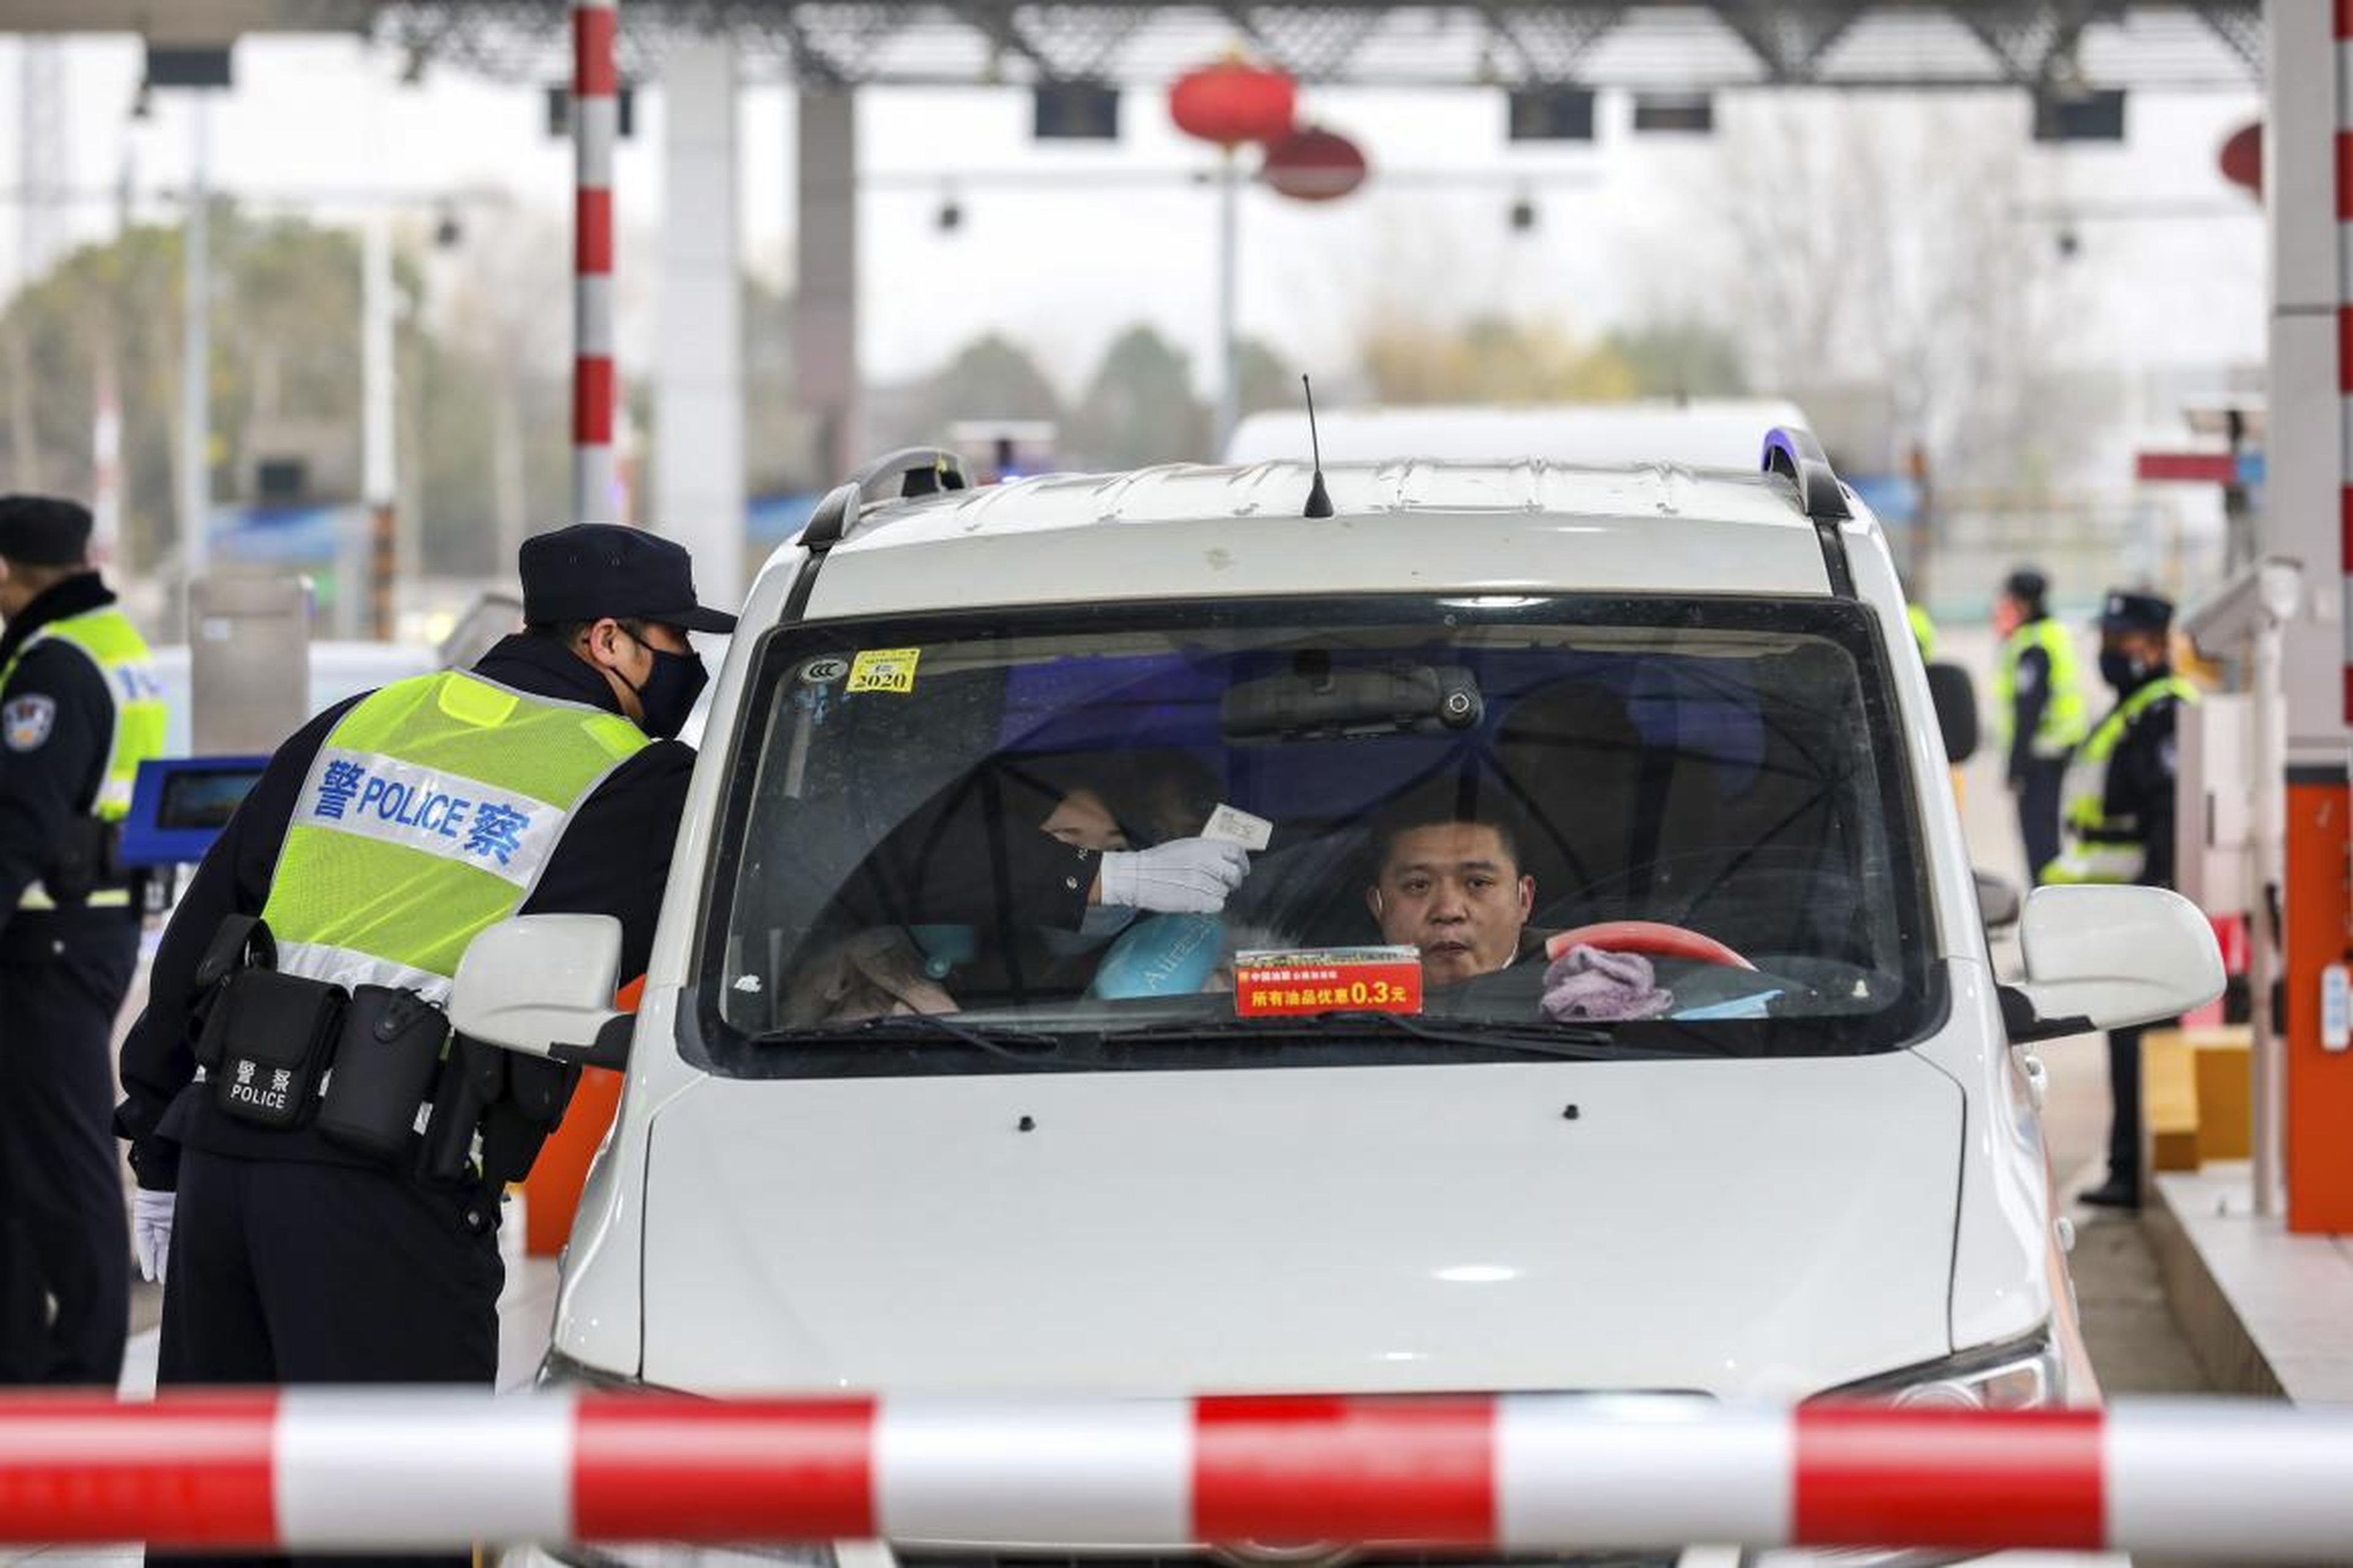 A policeman uses a digital thermometer to take a driver's temperature at a checkpoint at a highway toll gate in Wuhan, China on January 23, 2020.